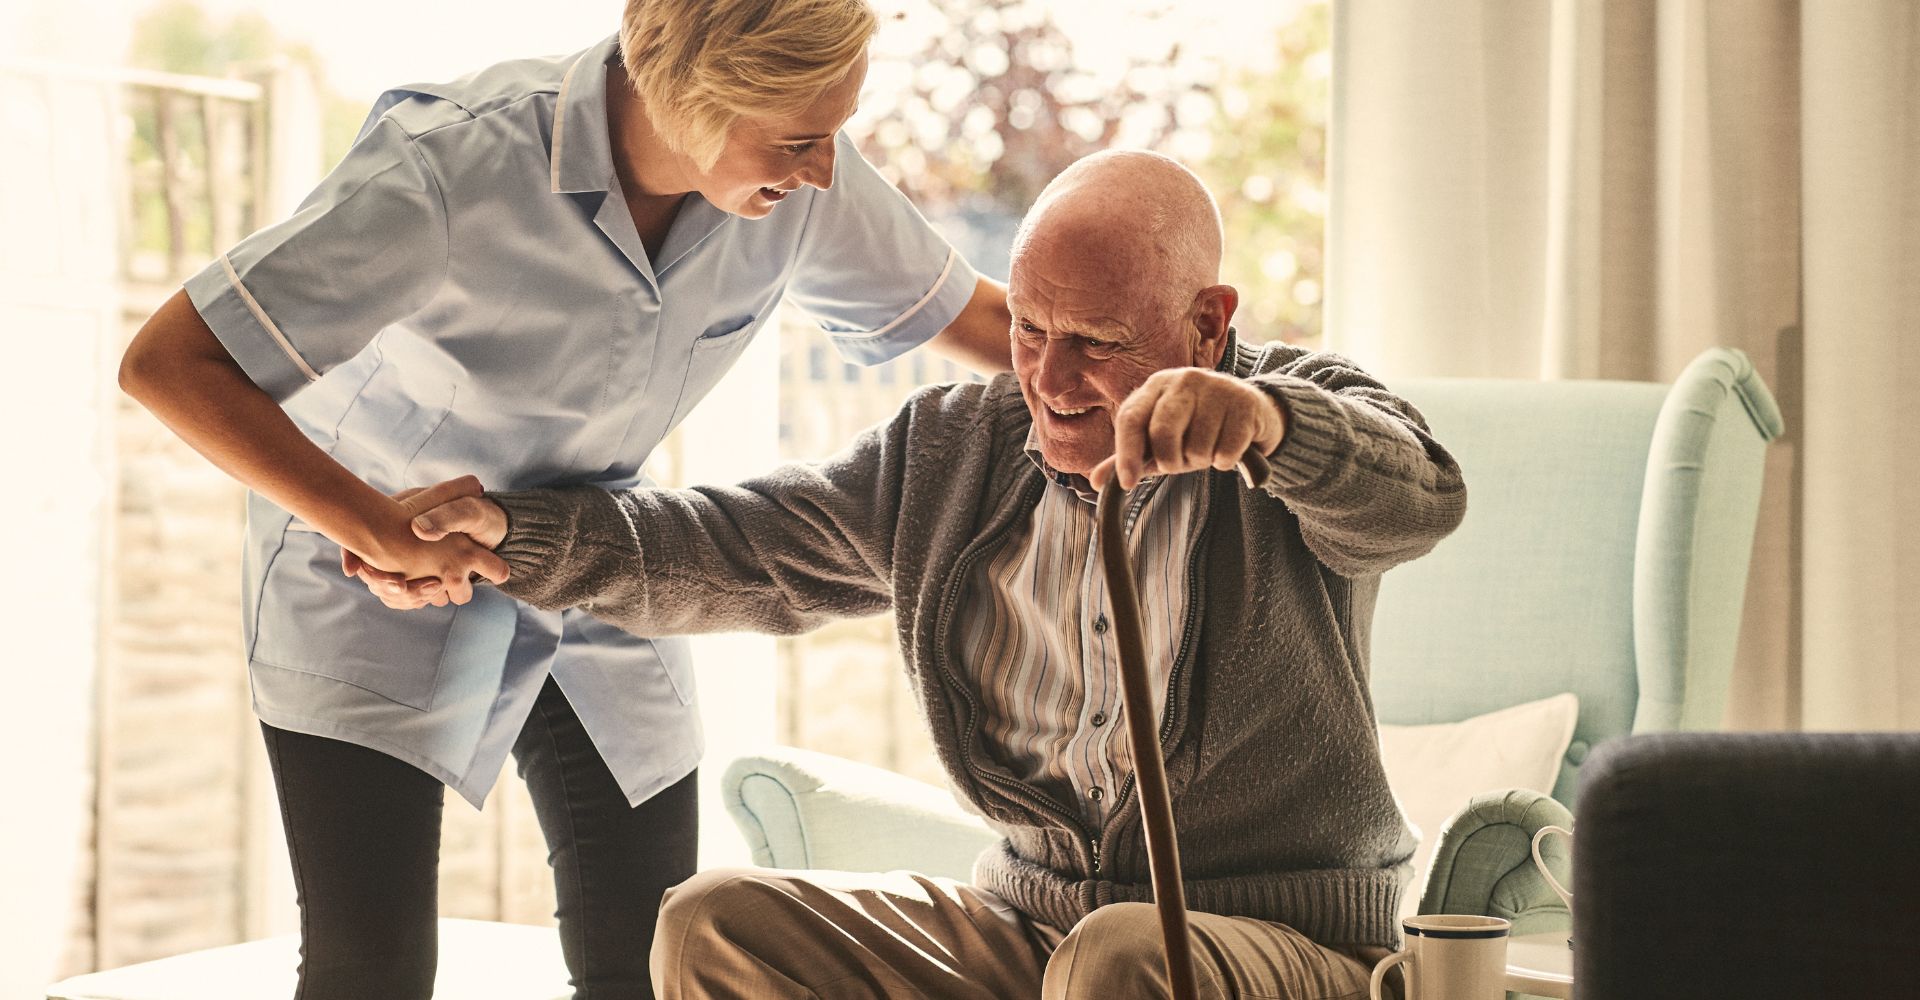 A senior being helped up from his seat by an at-home care professional